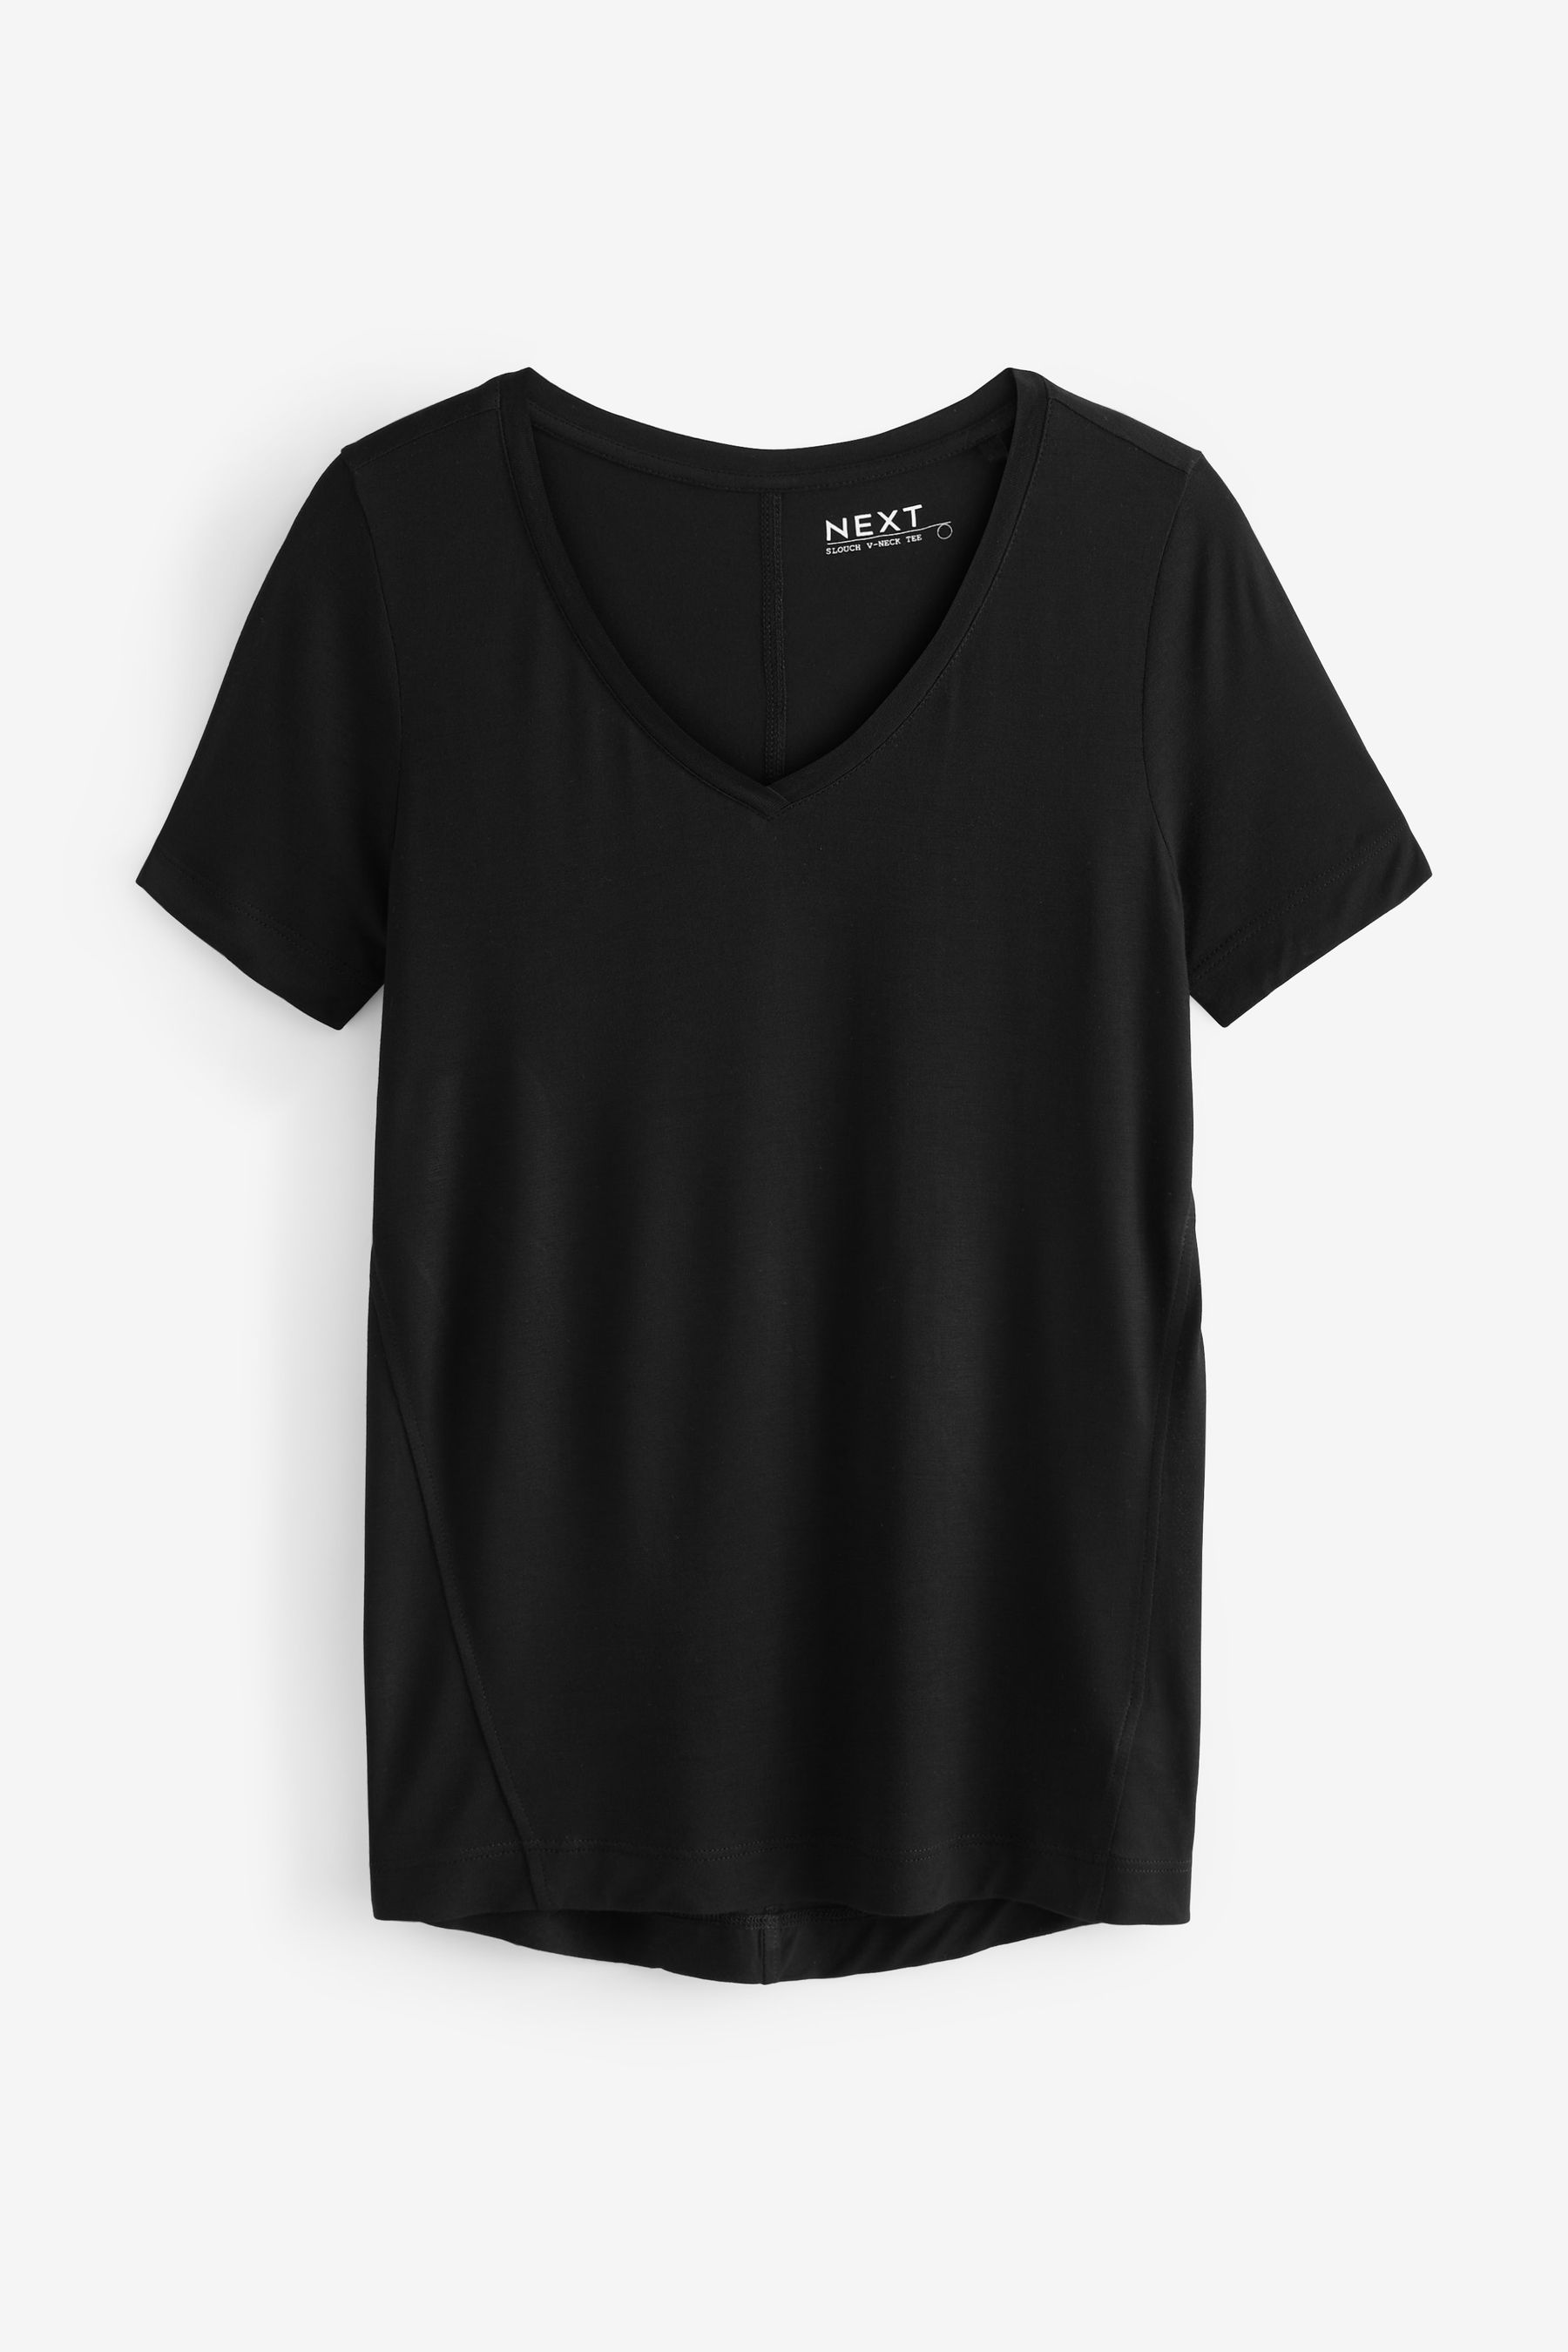 Buy Black Slouch V-Neck T-Shirt from the Next UK online shop